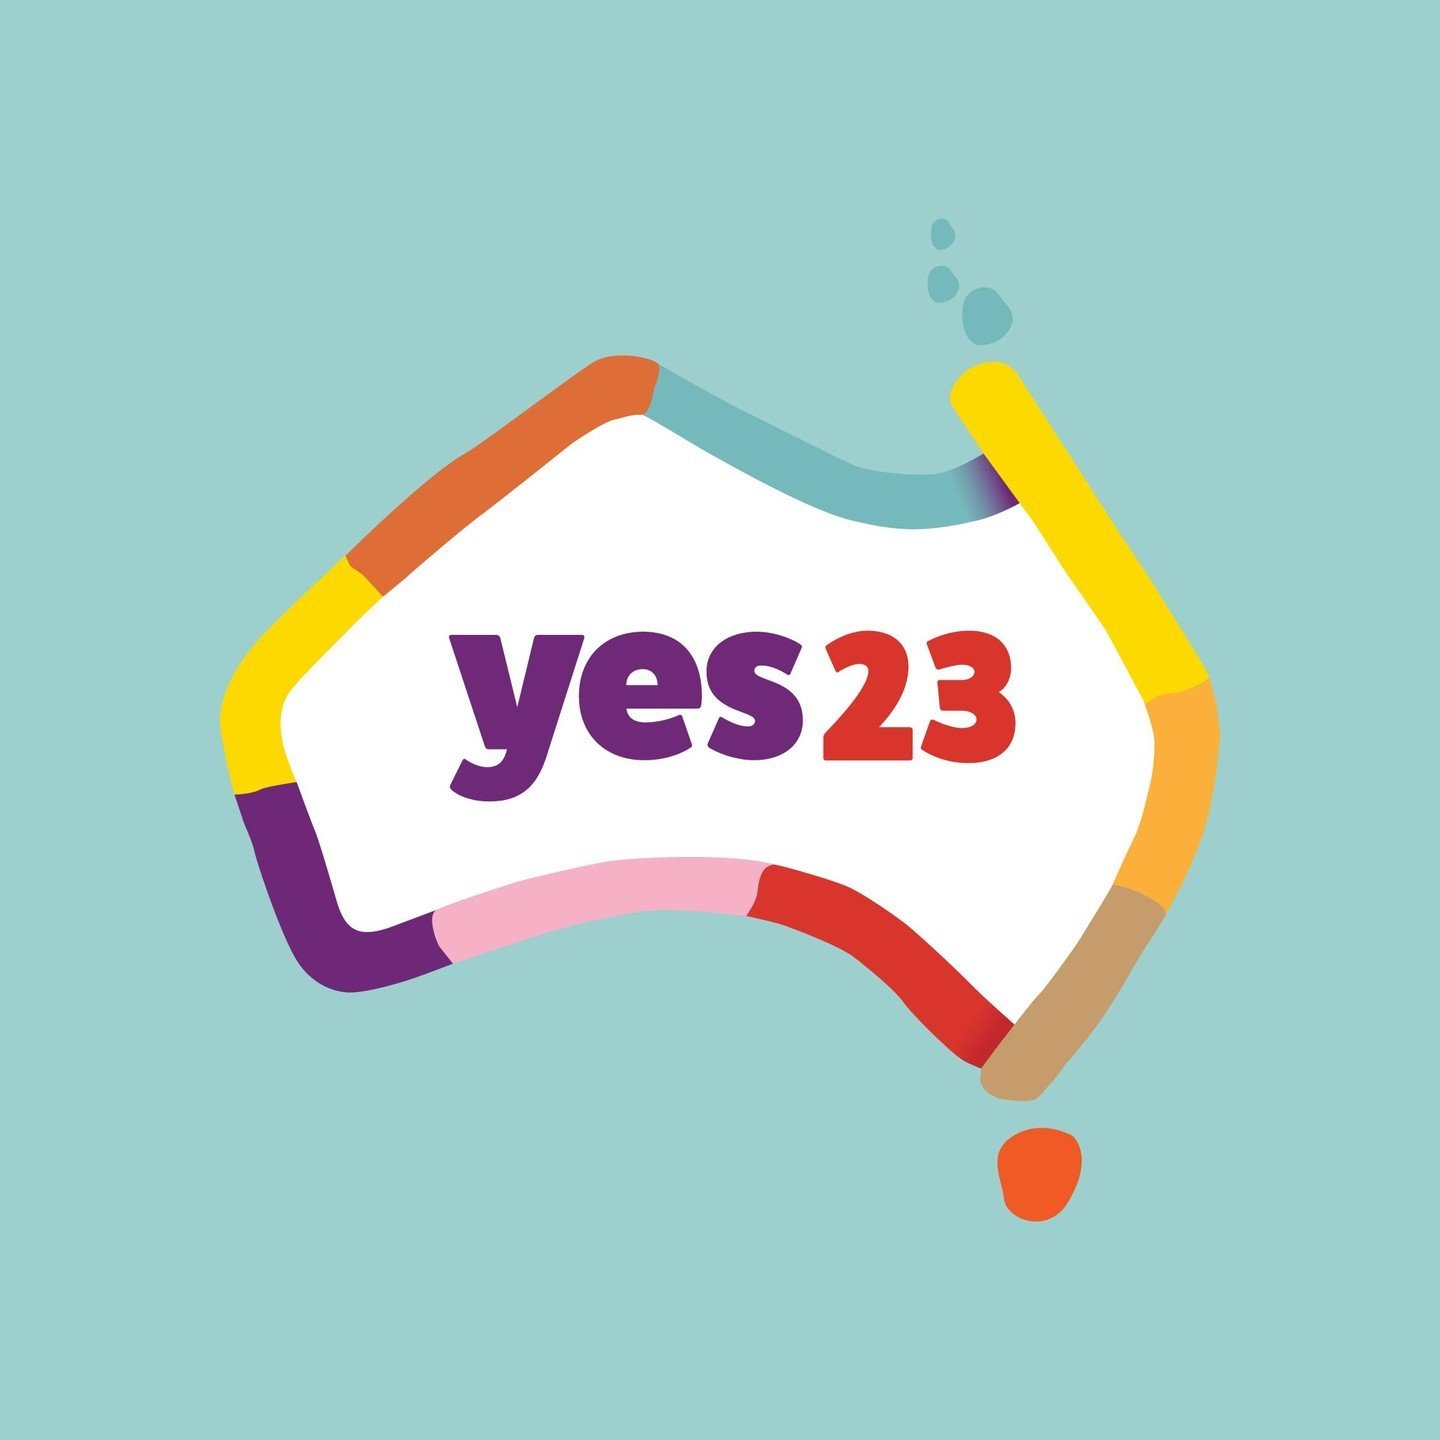 'Yes' to the Voice to Parliament